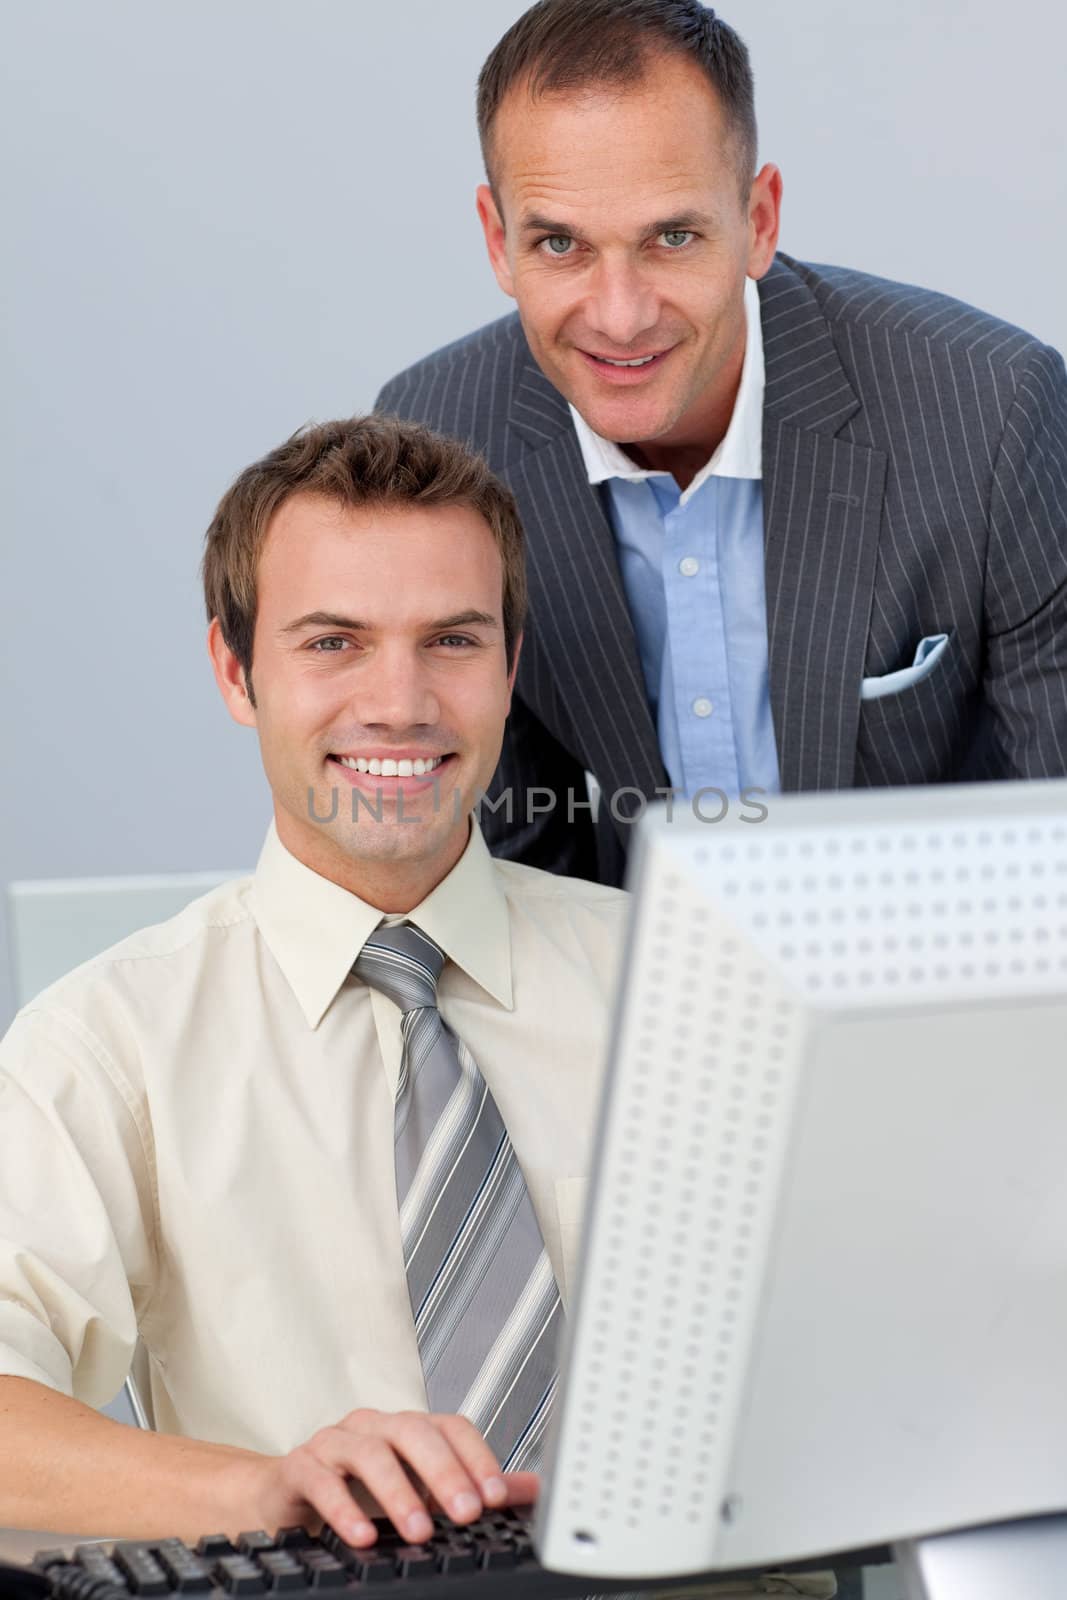 Assertive business partners working together at a computer in the office